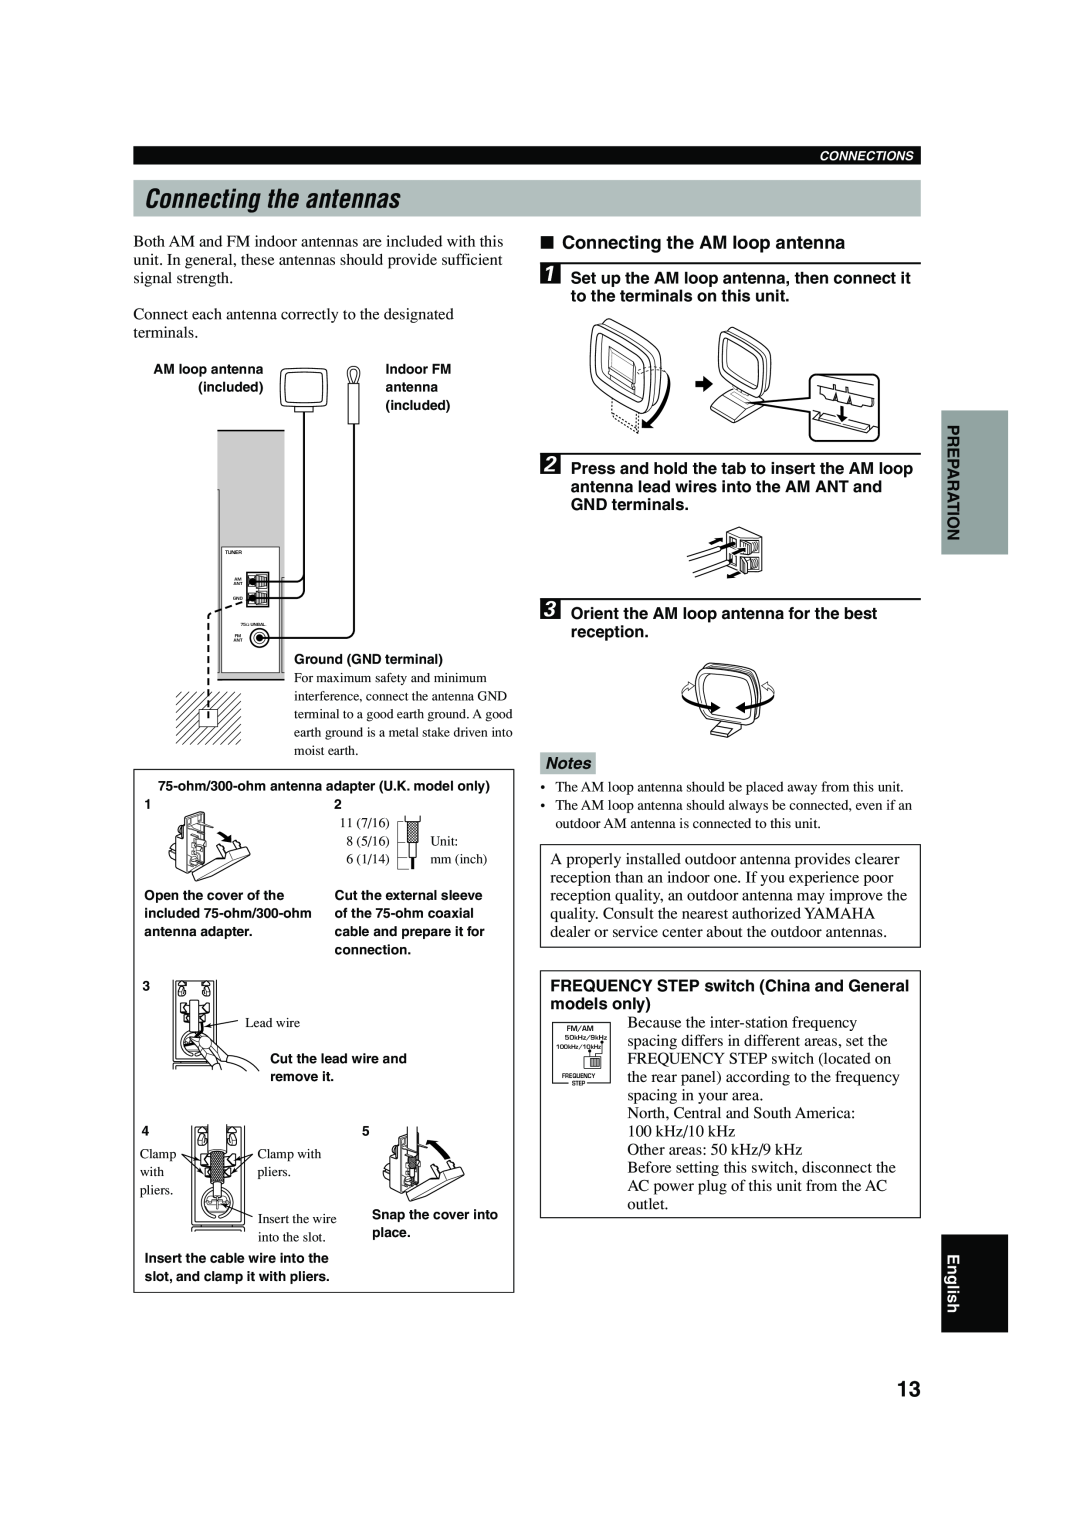 Yamaha RX-V740 owner manual Connecting the antennas, Connecting the AM loop antenna, English 